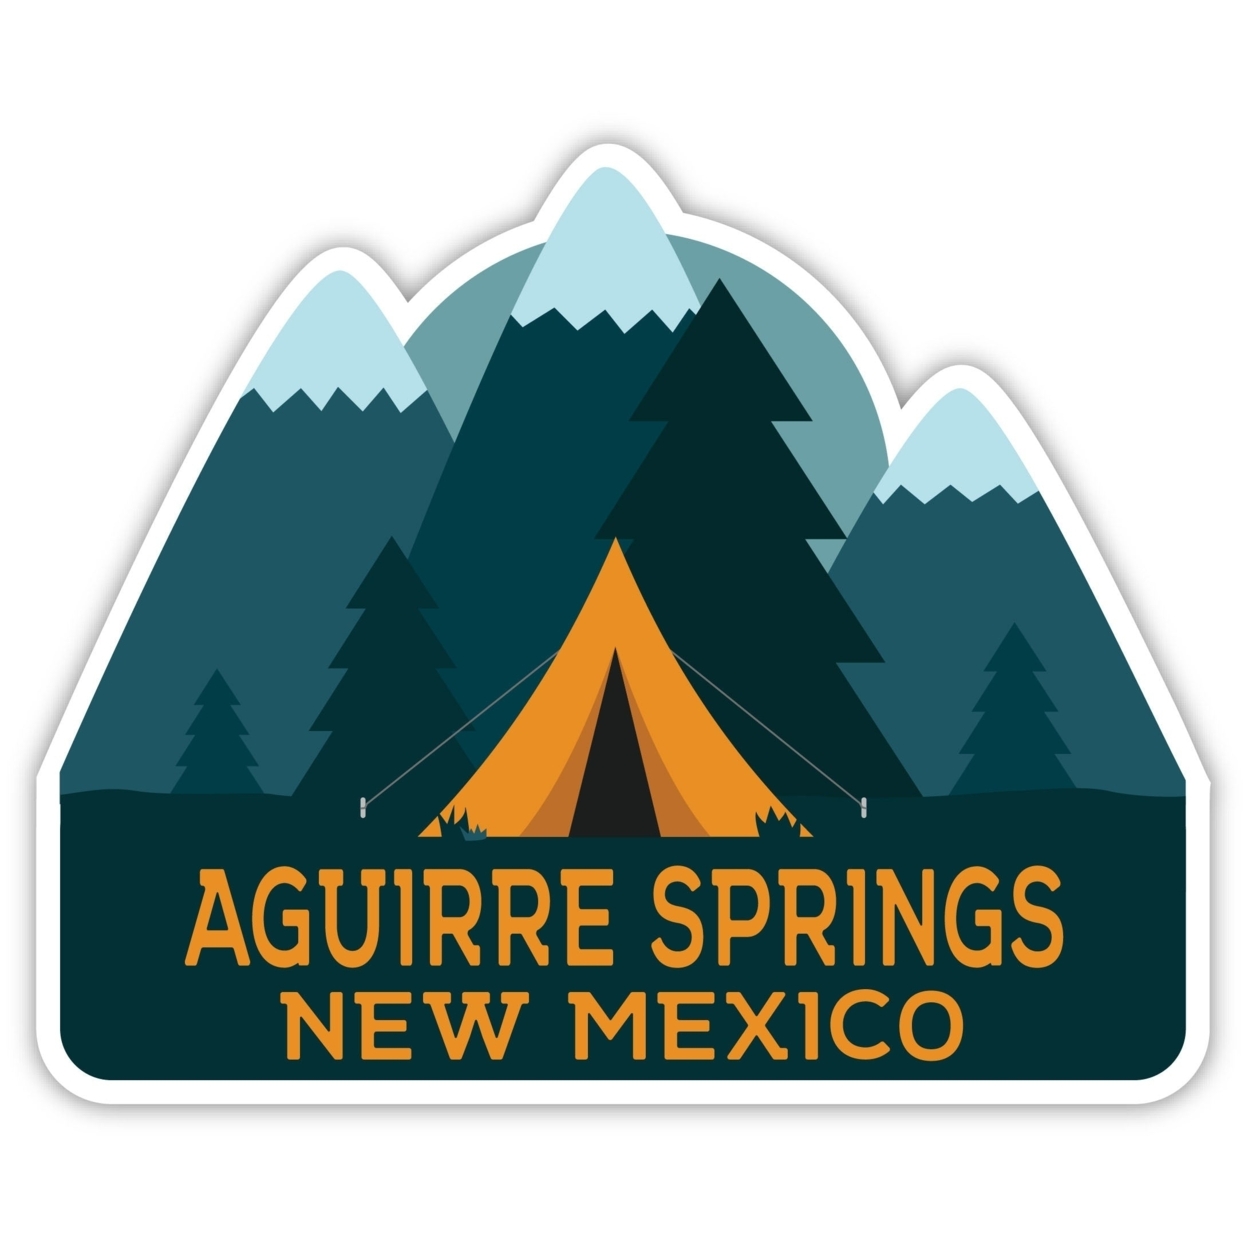 Aguirre Springs New Mexico Souvenir Decorative Stickers (Choose Theme And Size) - 4-Pack, 10-Inch, Tent